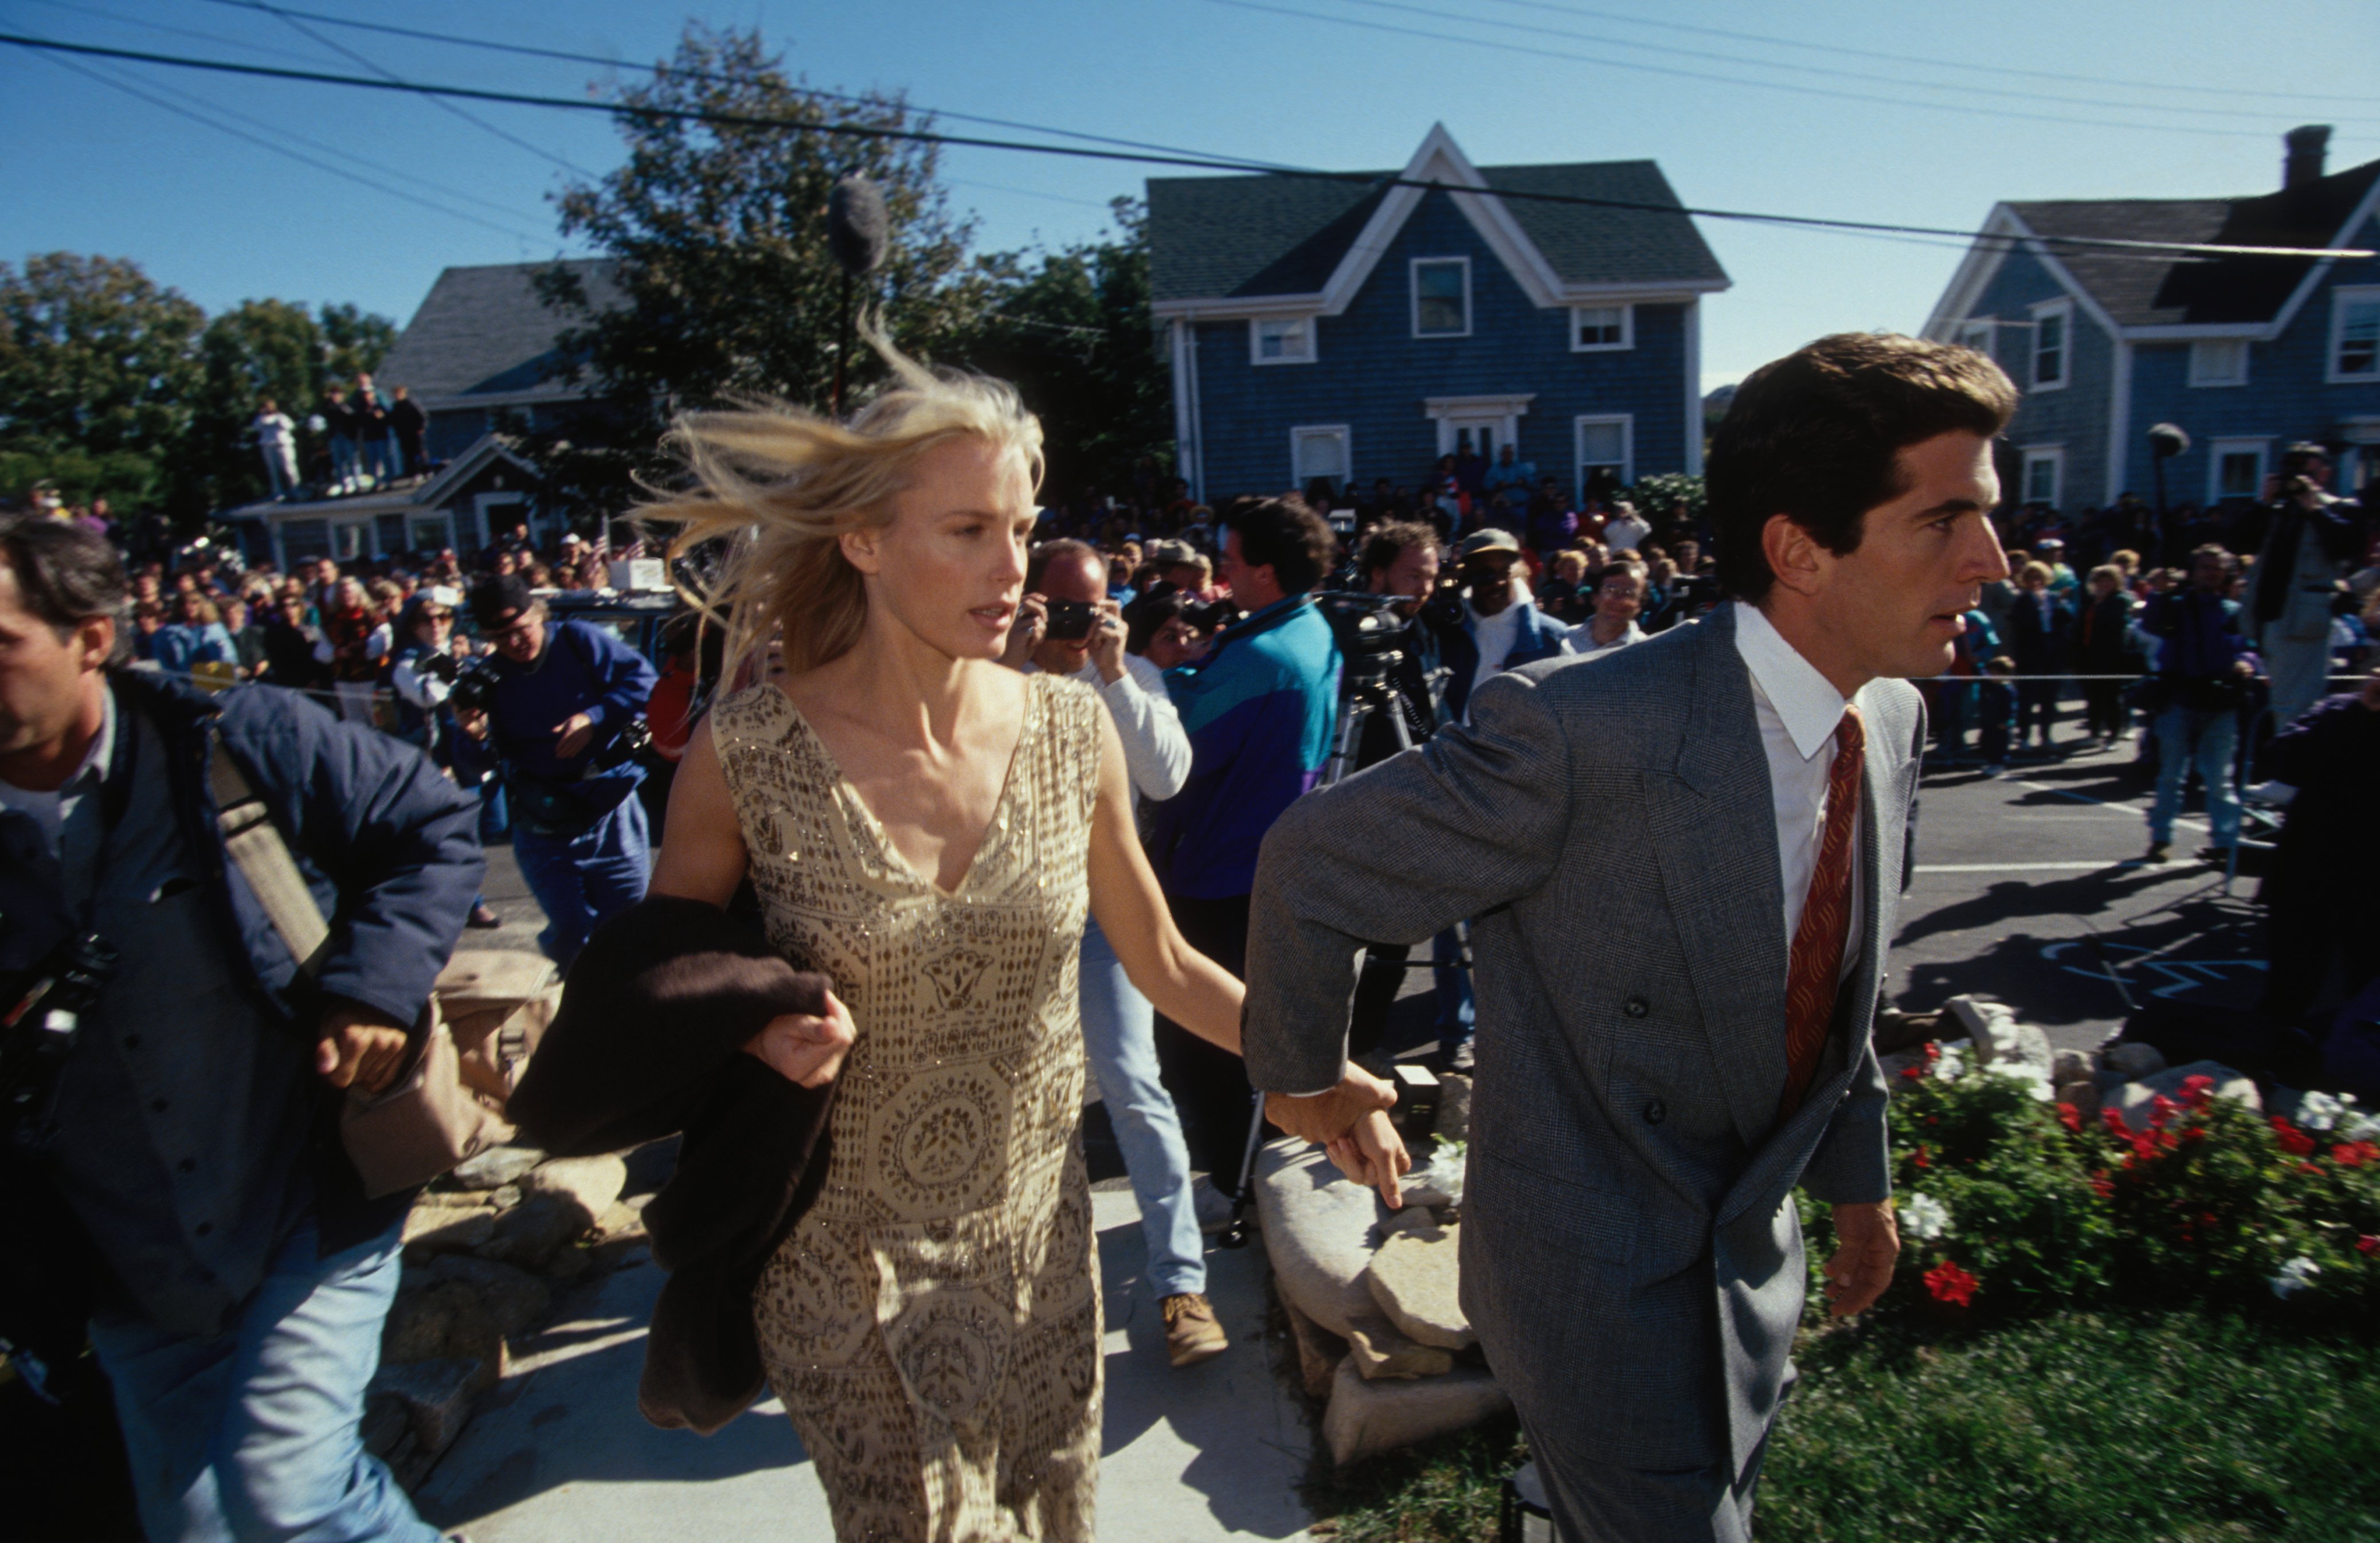 John F. Kennedy, Jr. and Daryl Hannah arriving at the wedding of his cousin Edward Kennedy, Jr. in Rhode Island. / Source: Getty Images